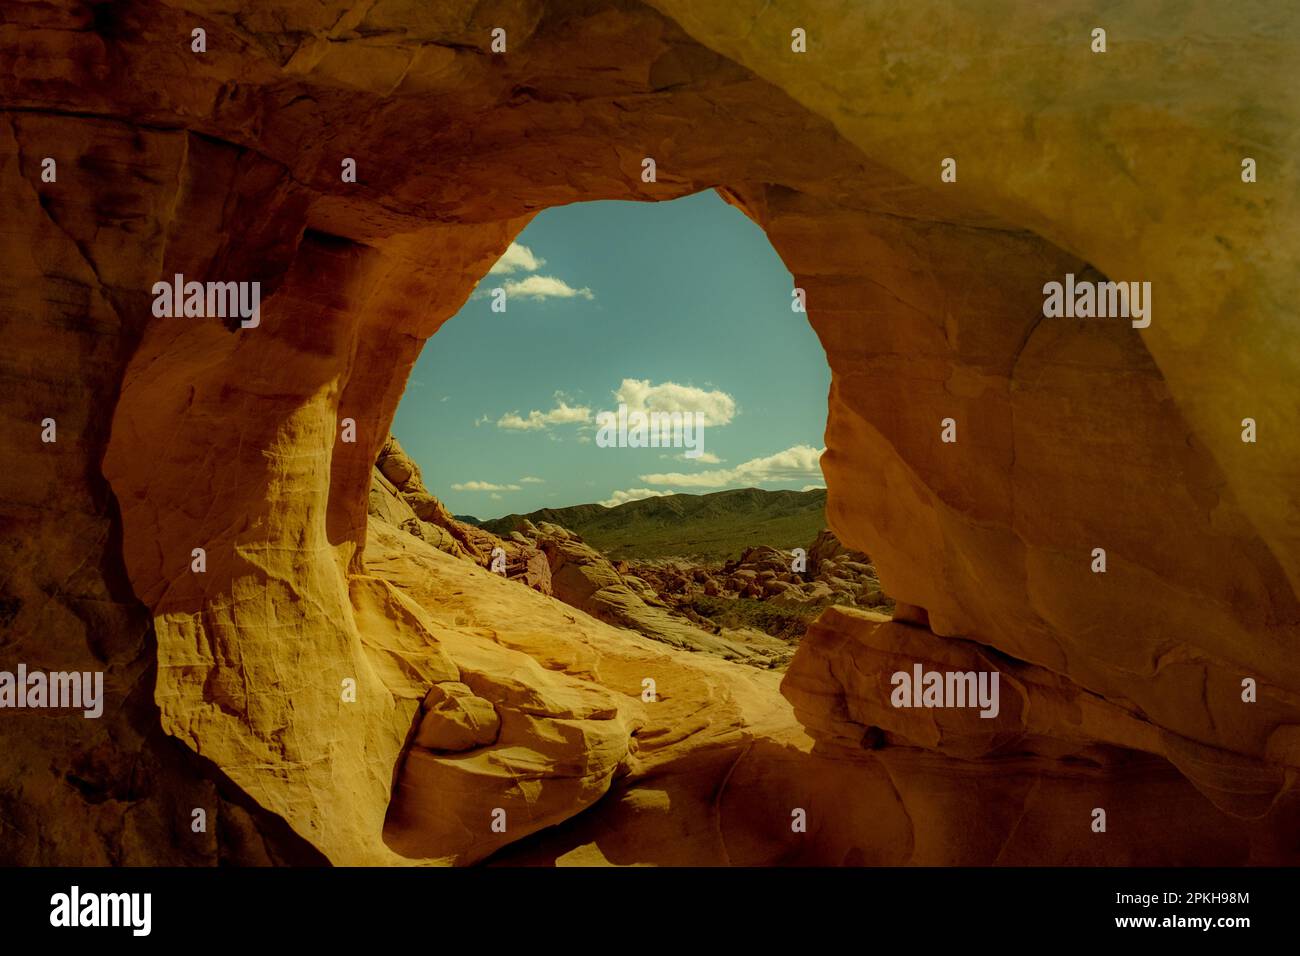 Looking through a hole in the rocks into the beautiful unknown Stock Photo